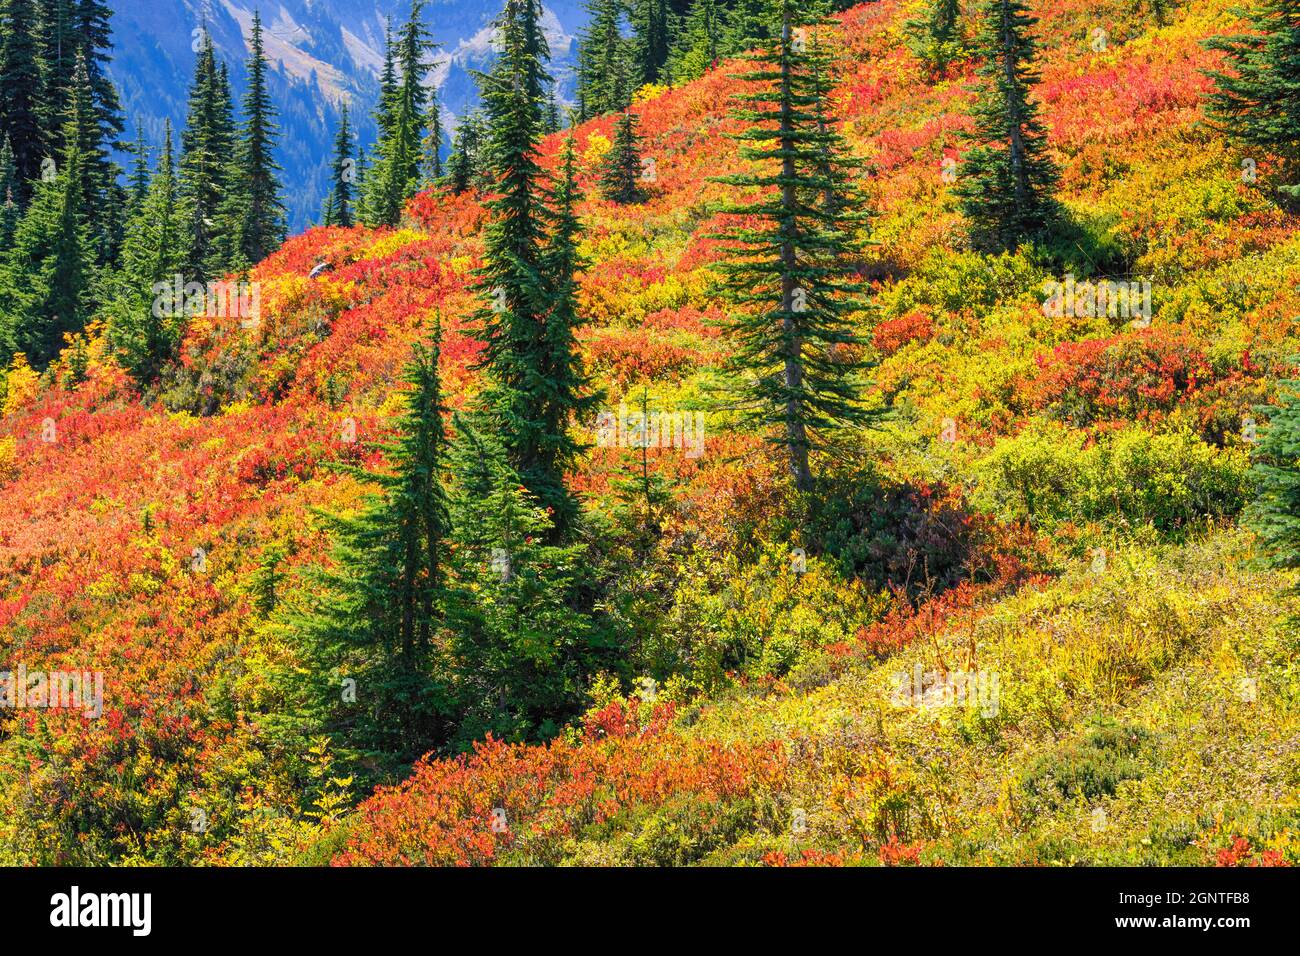 Fall brings a patchwork of warm colors to the volcanic slopes of Mount Rainier National Park in Washington State Stock Photo